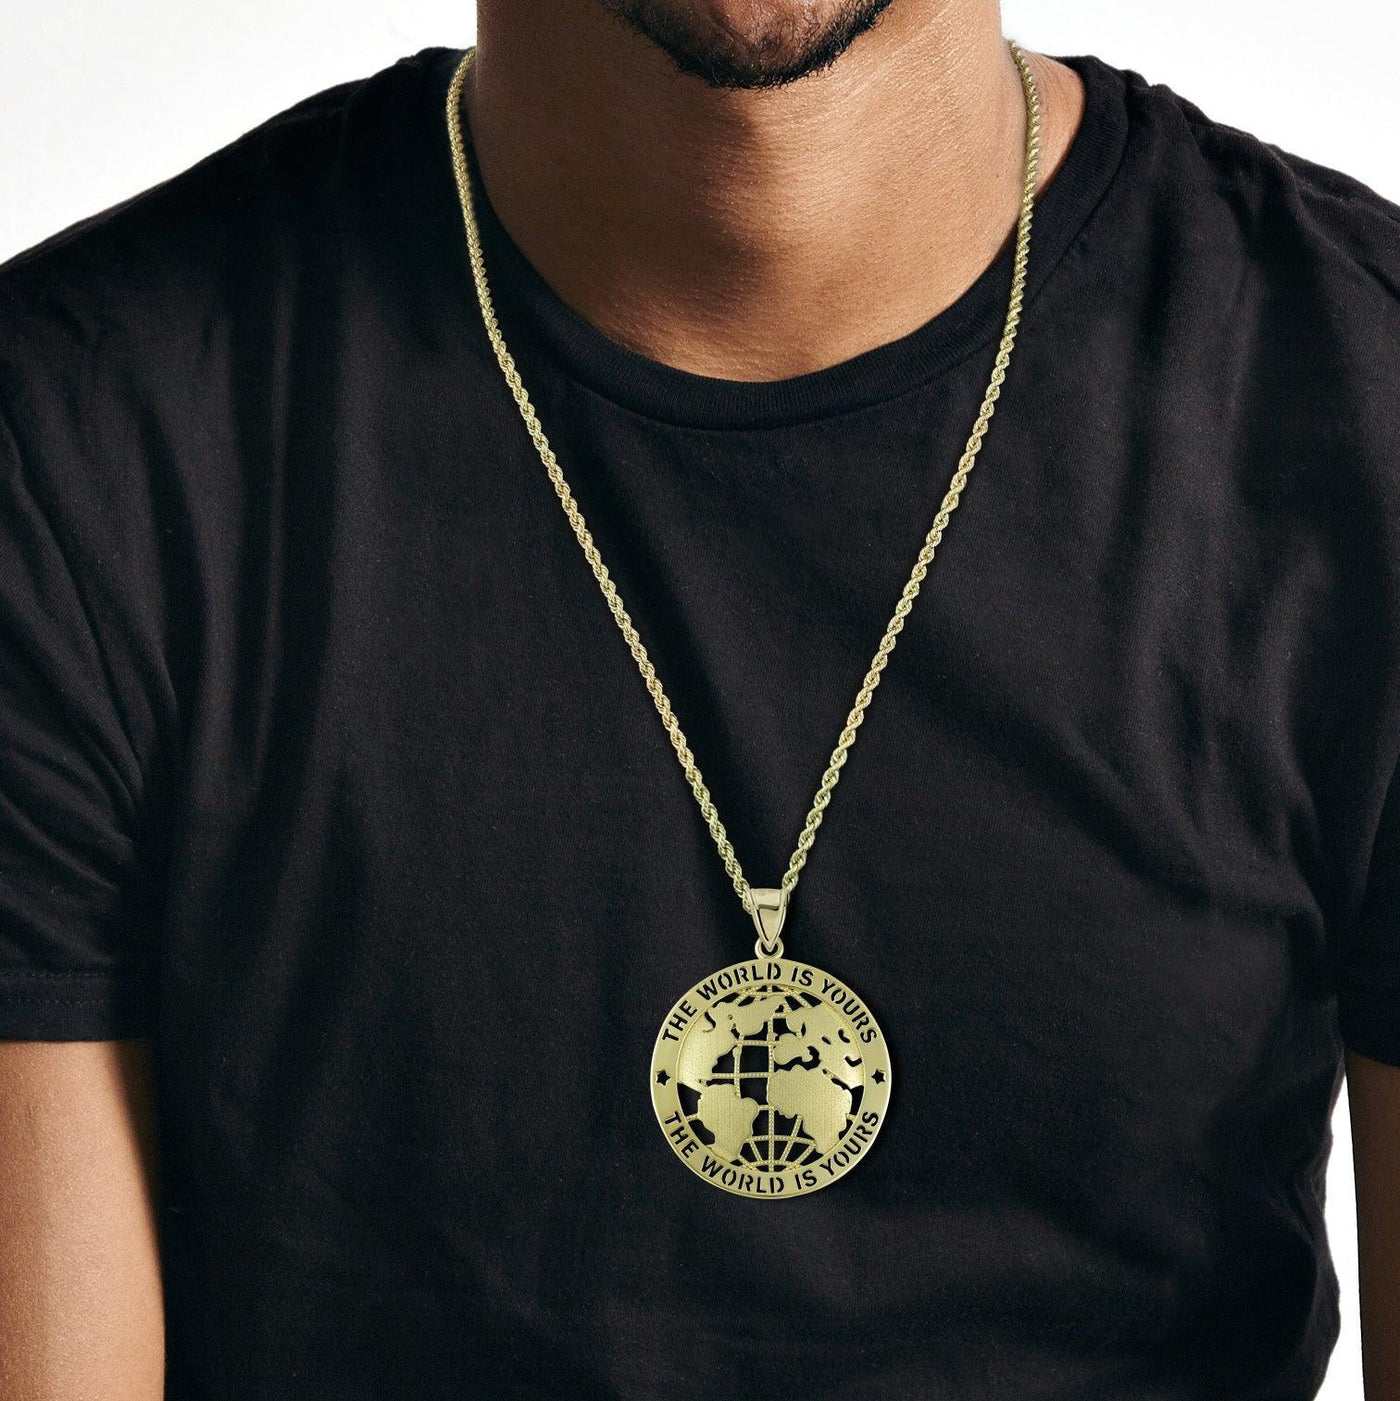 "The World is Yours" Pendant 10K Yellow Gold - bayamjewelry